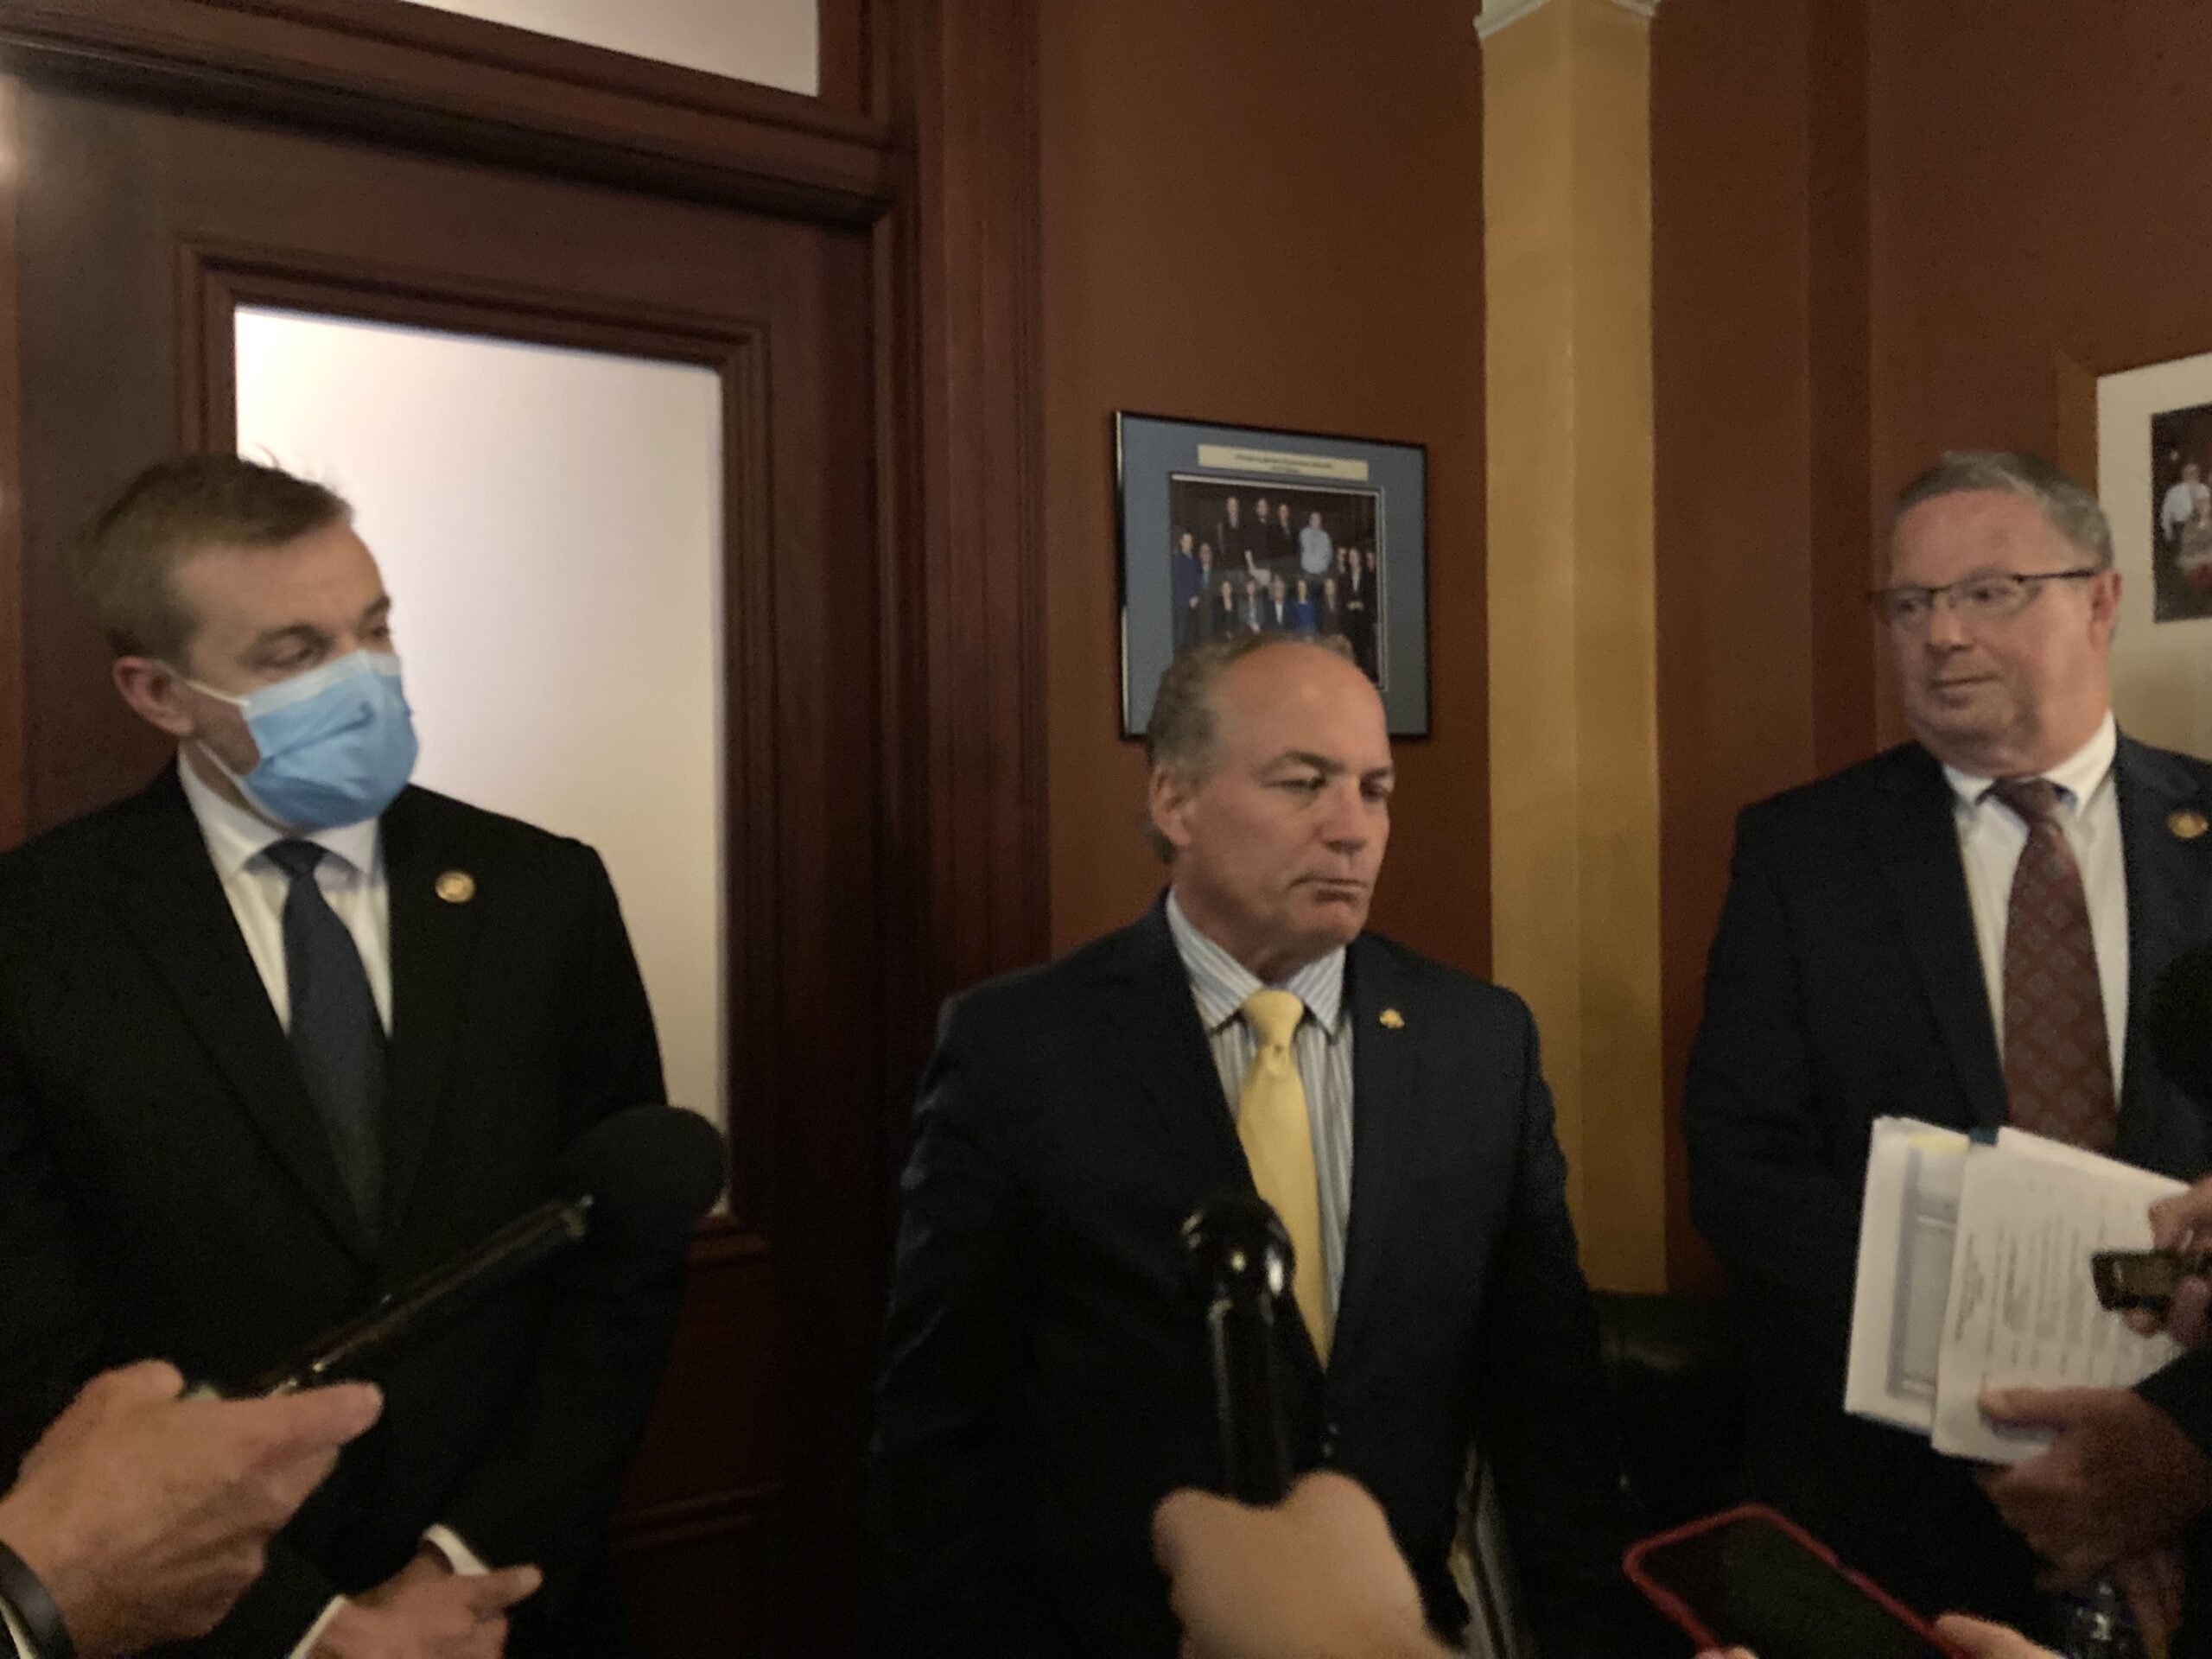 From left, House Speaker Bryan Cutler (R-Lancaster), Majority Leader Kerry Benninghoff (R-Centre) and House Republican Appropriations Chair Stan Saylor (R-York) speak to the press about ongoing budget negotiations at the state Capitol in Harrisburg on July 1, 2022.